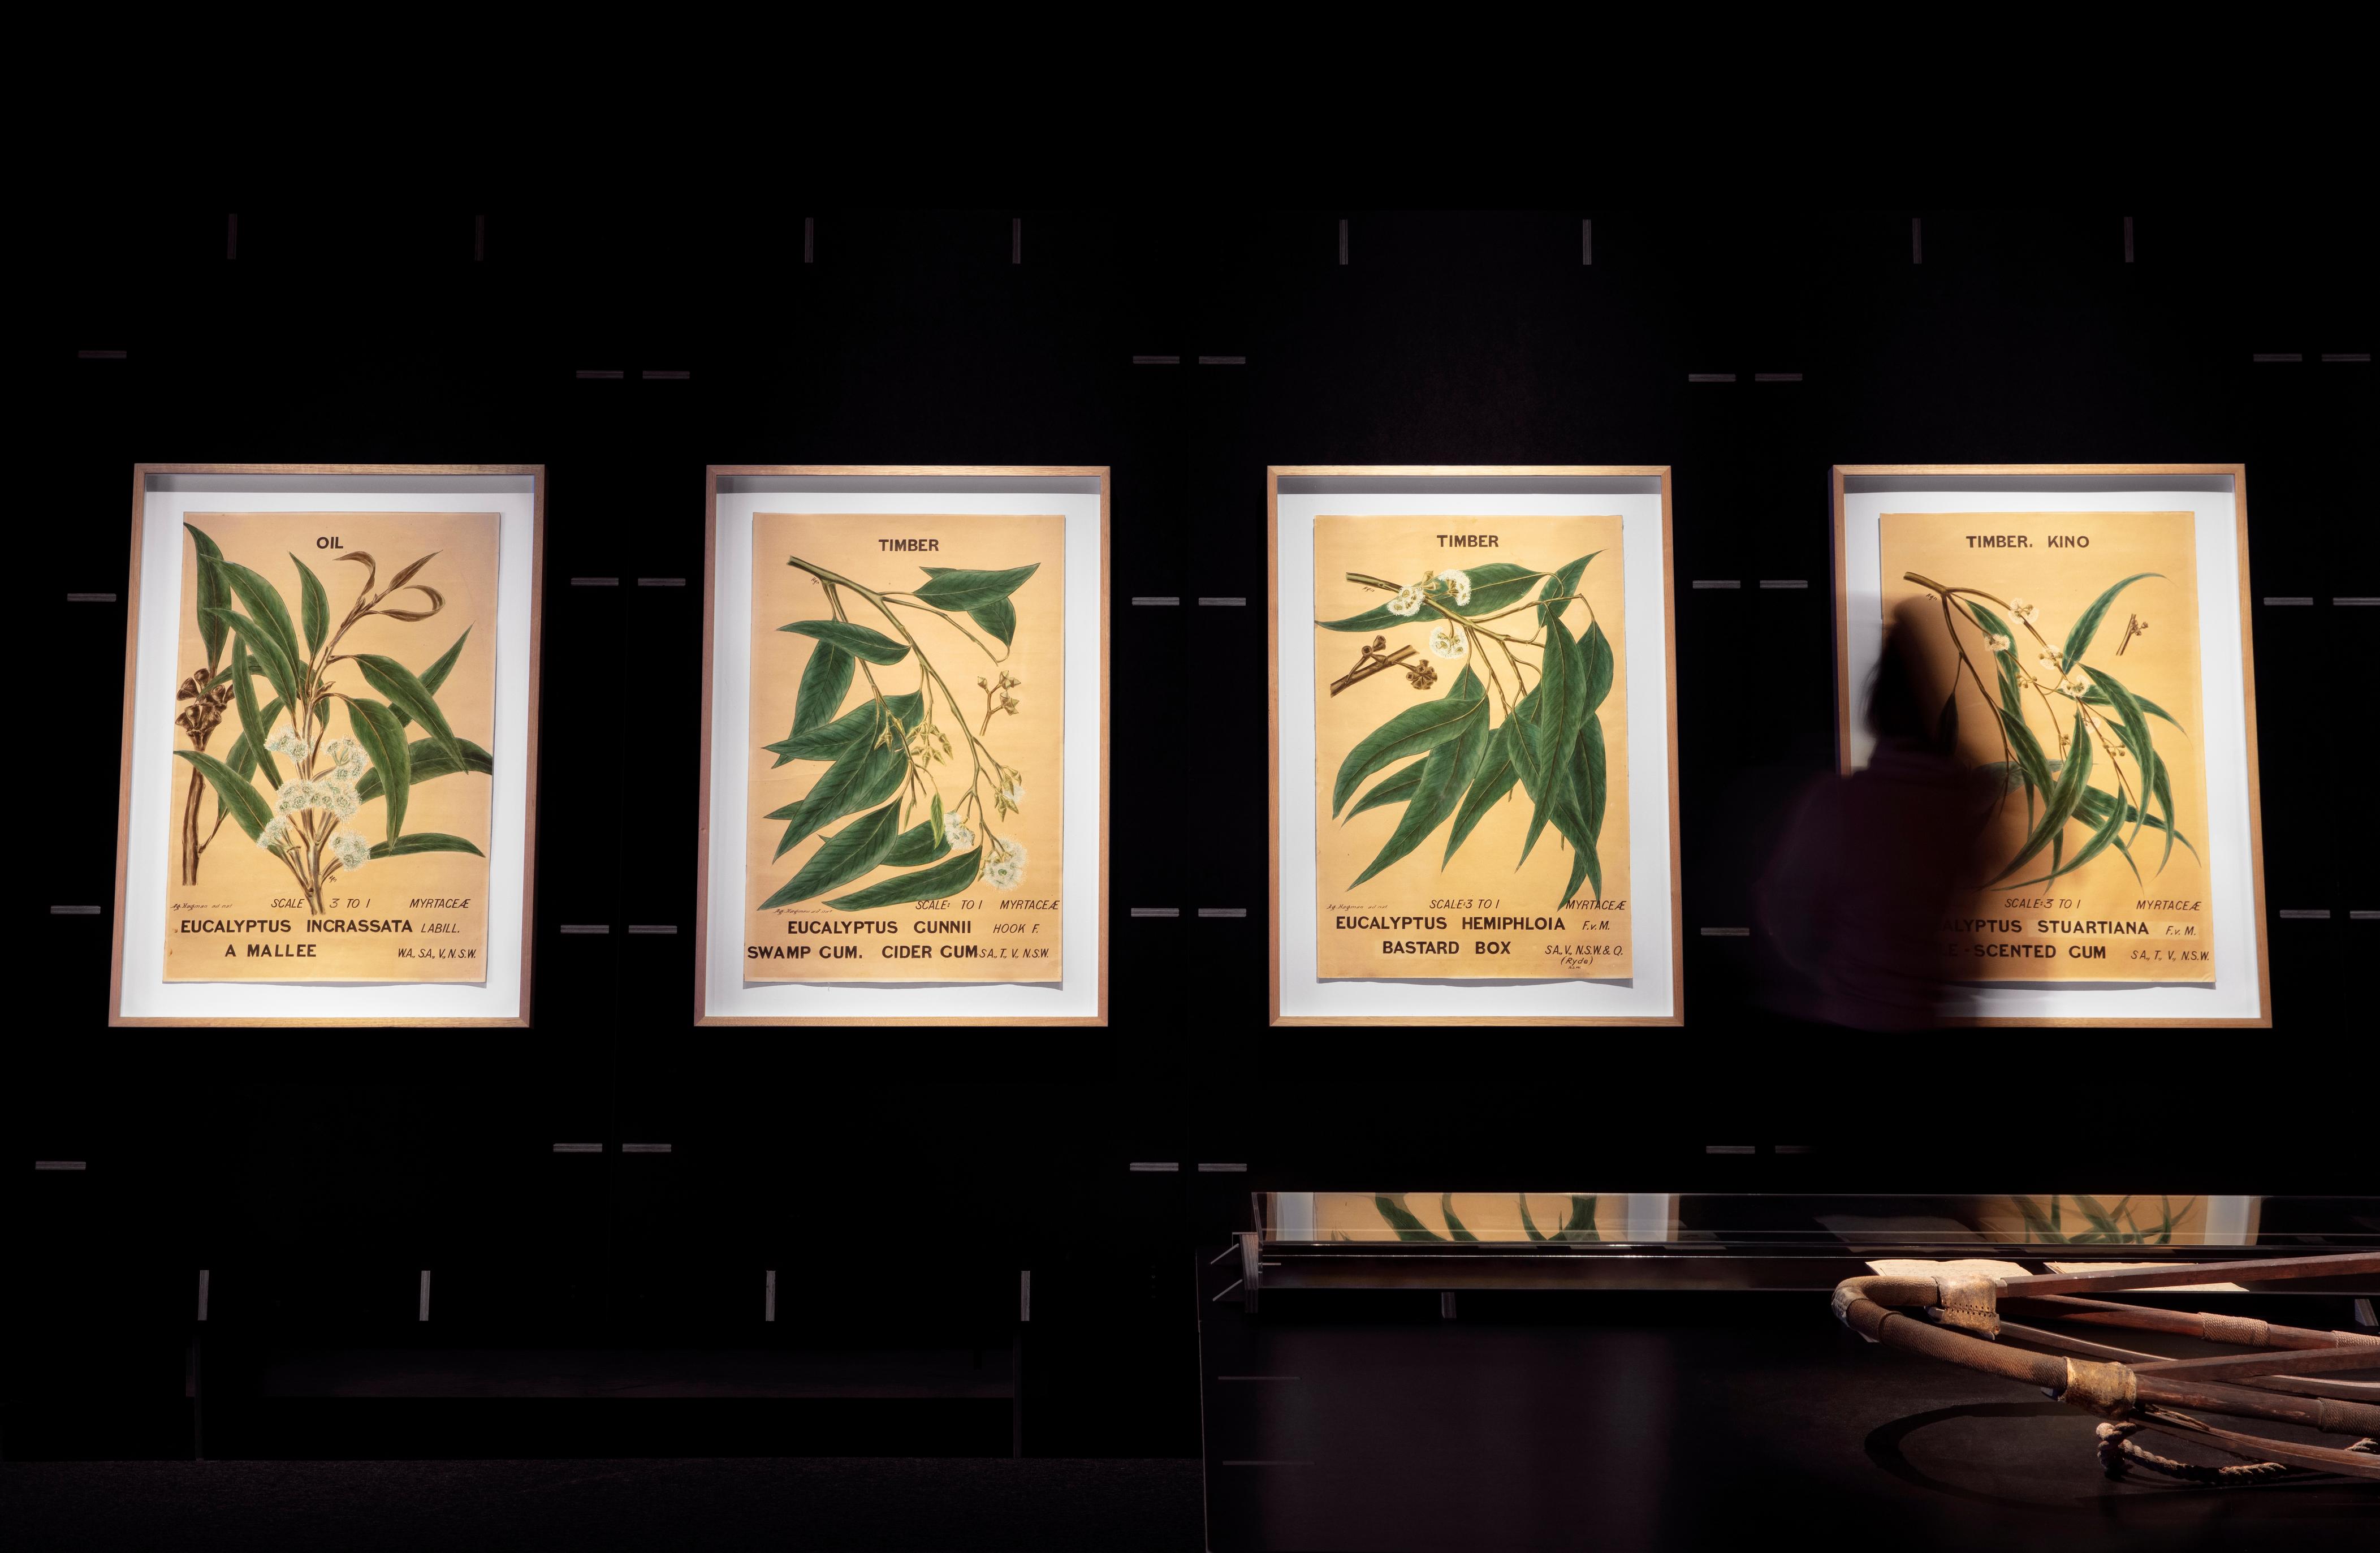 Four large water colour paintings of eucalyptus leaves. A blurred figure stands in front of the far right image.